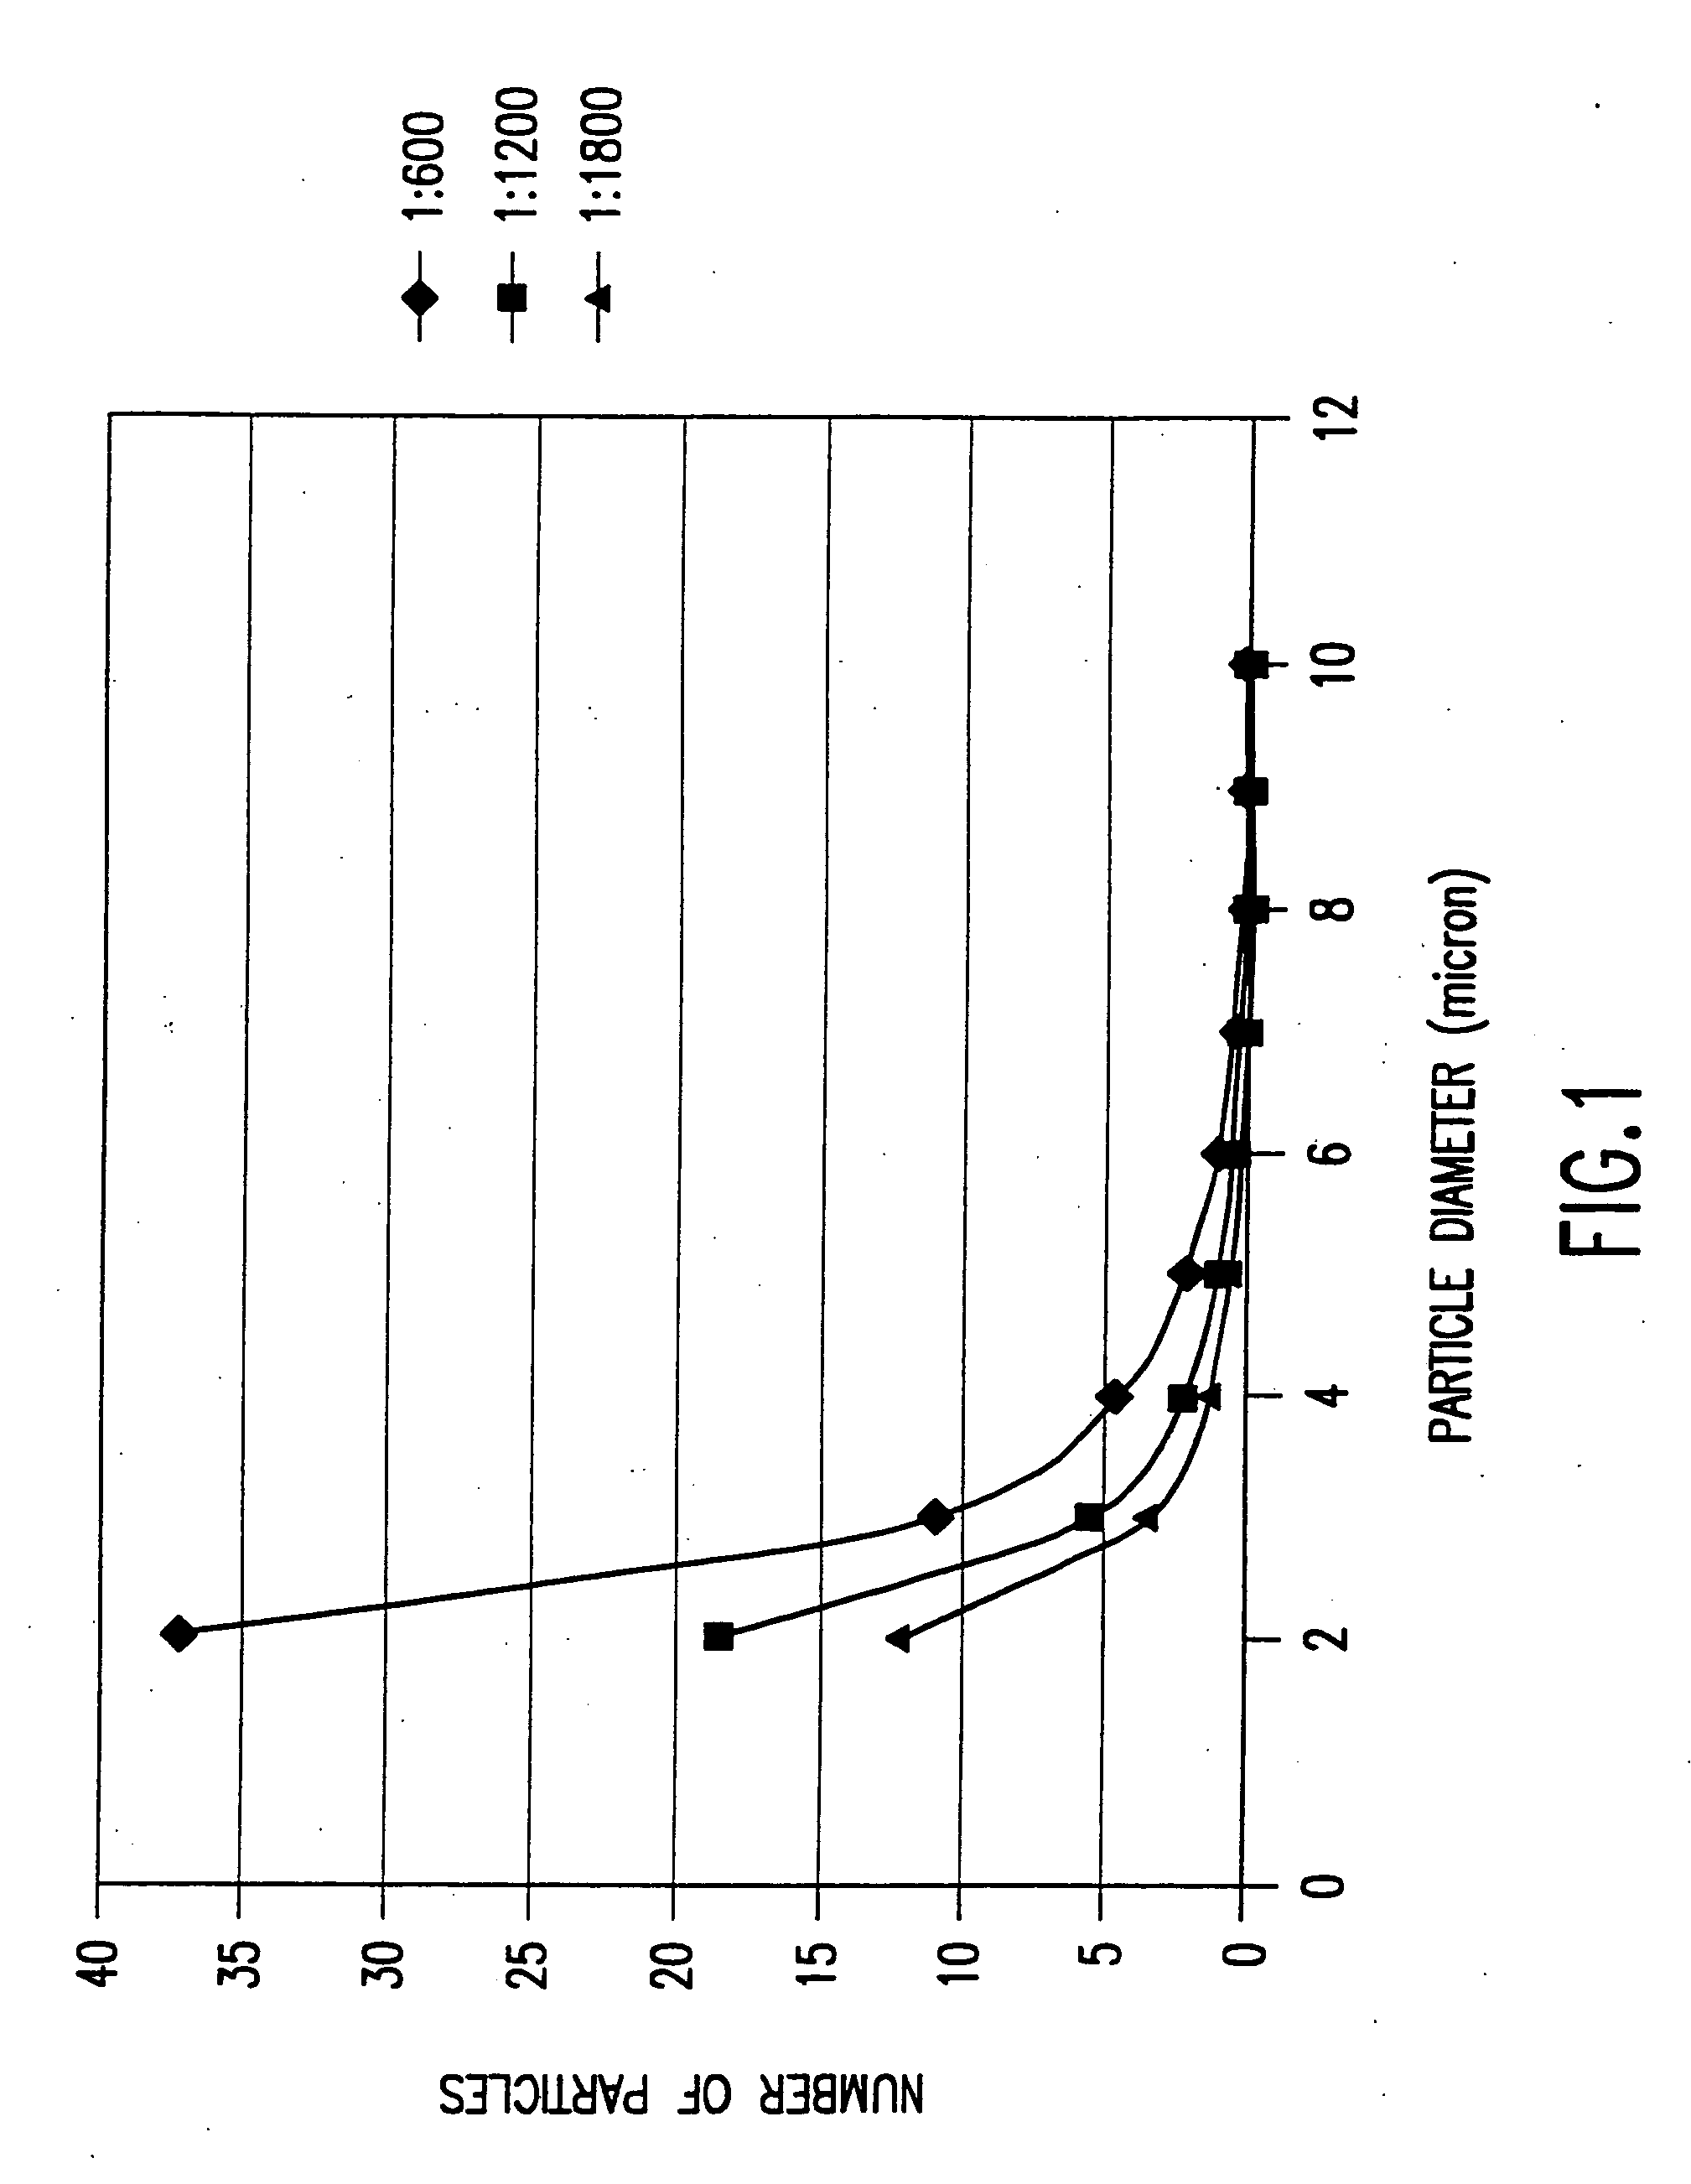 Method for coating small particles